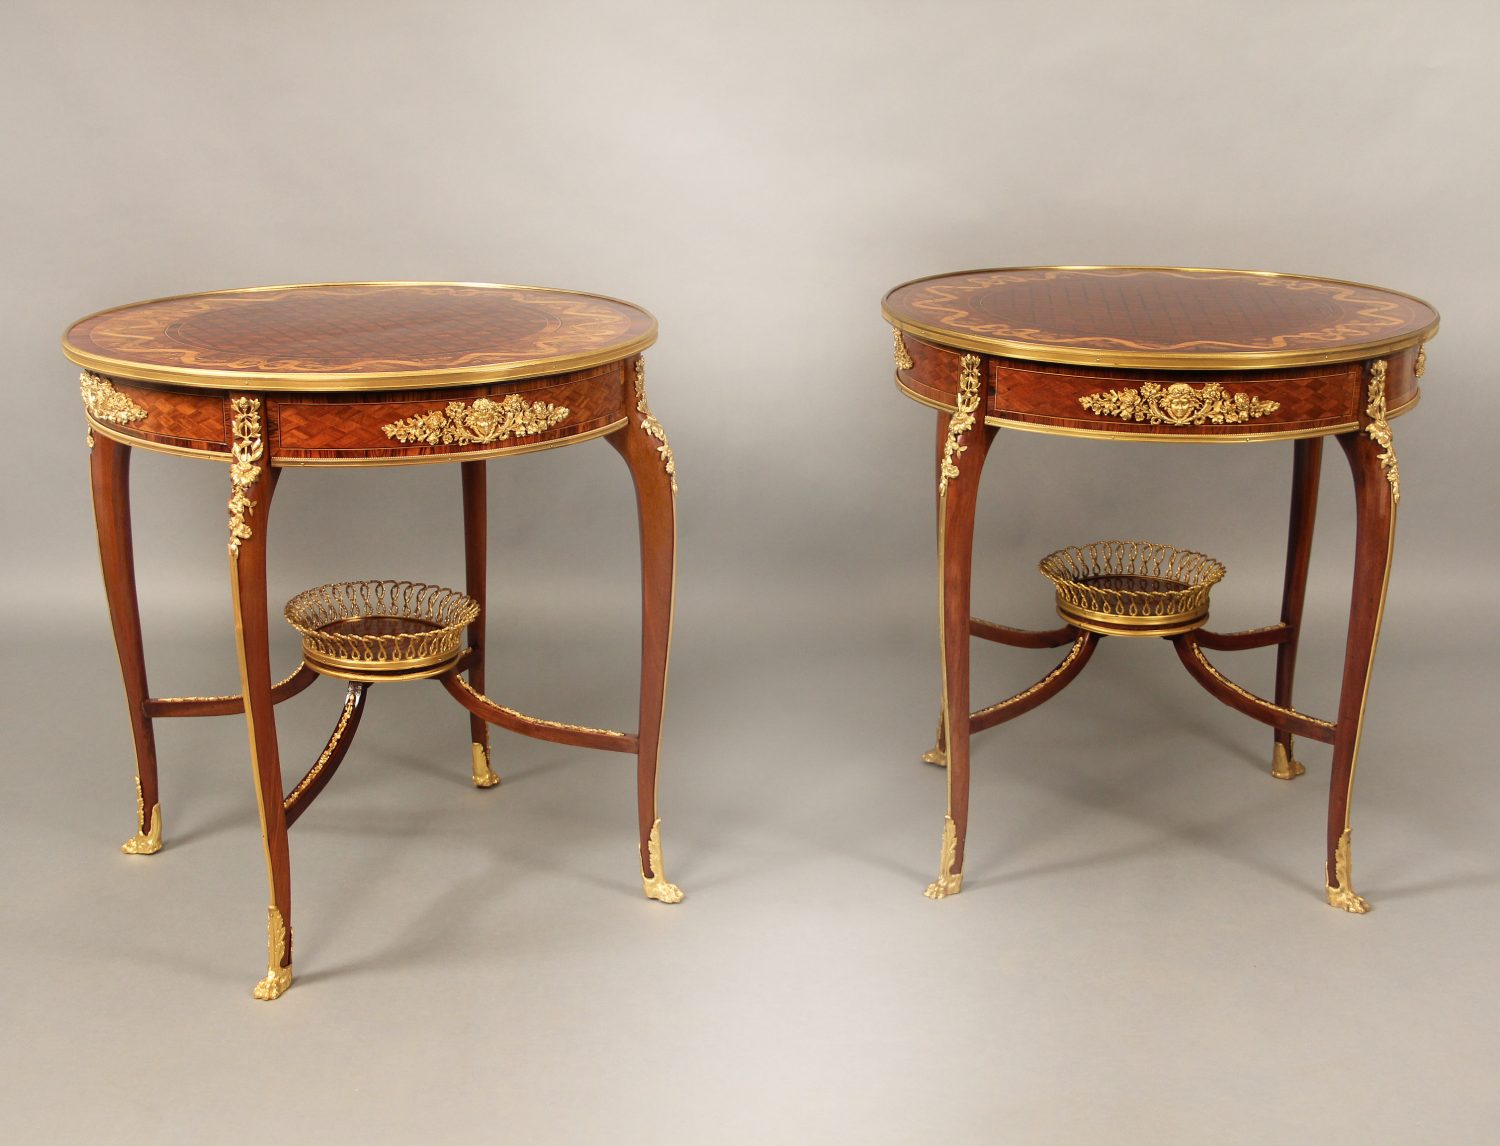 Pair of gilt bronze top lamp tables